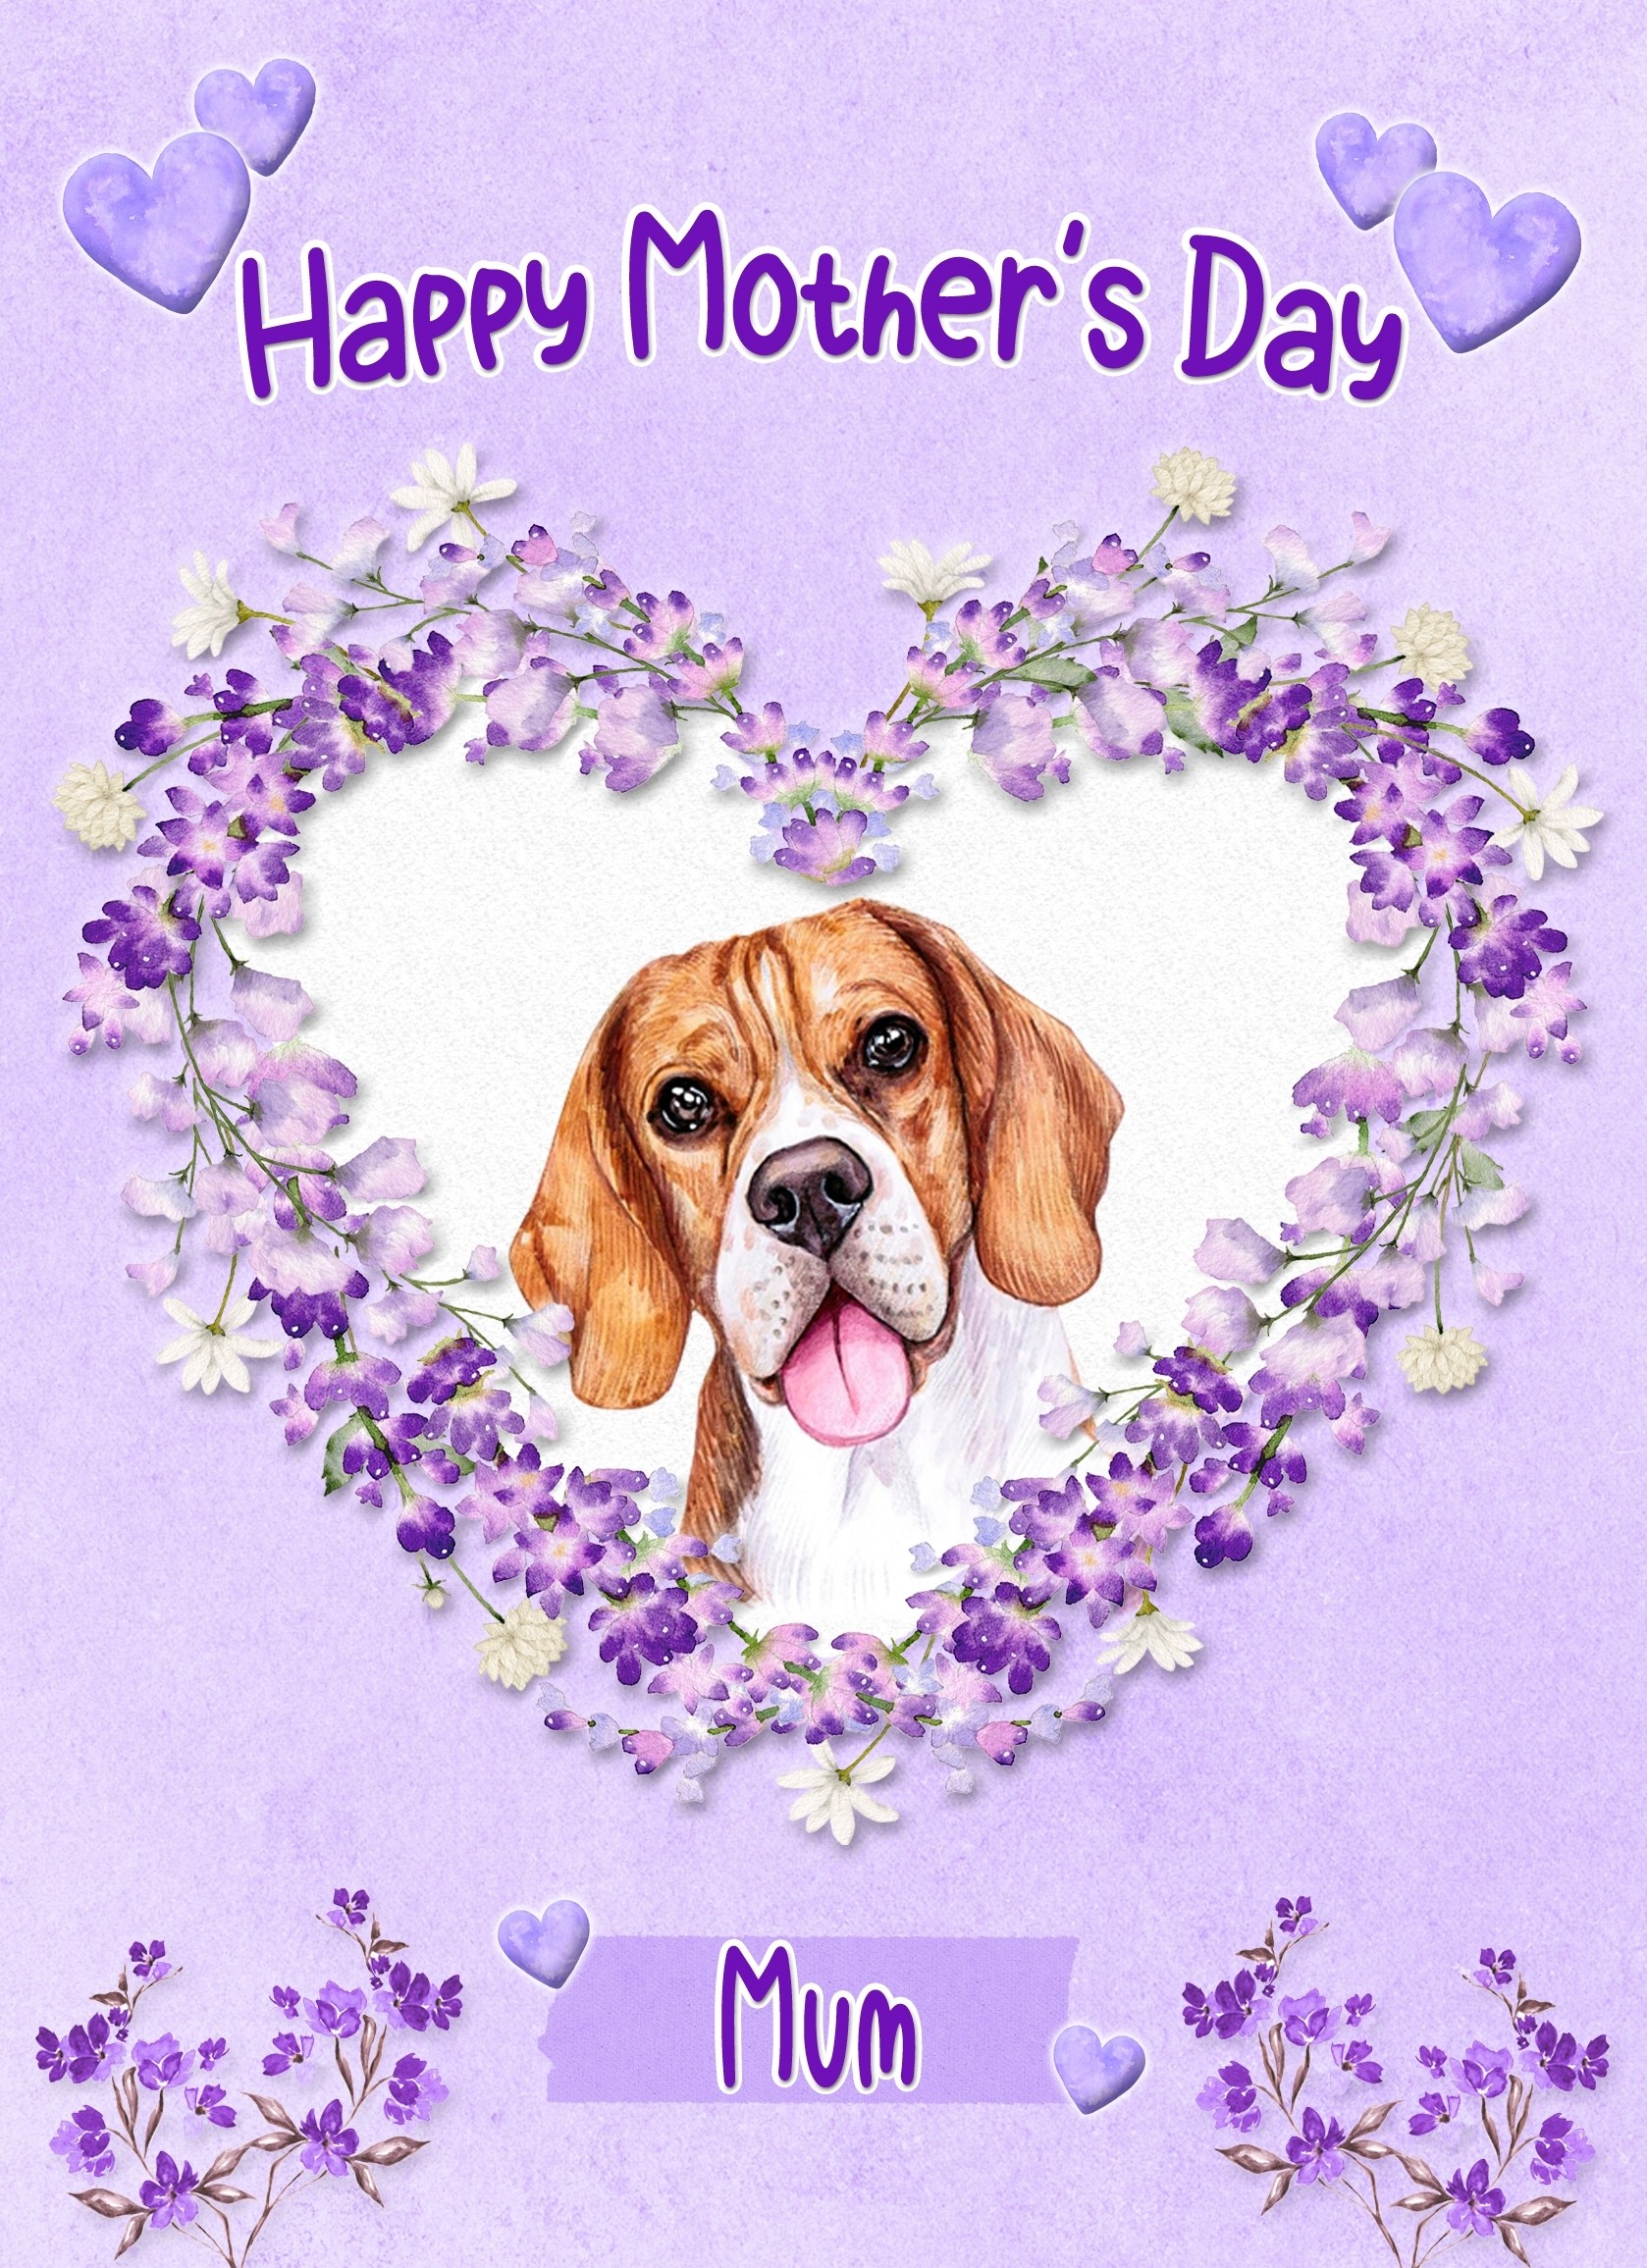 Beagle Dog Mothers Day Card (Happy Mothers, Mum)